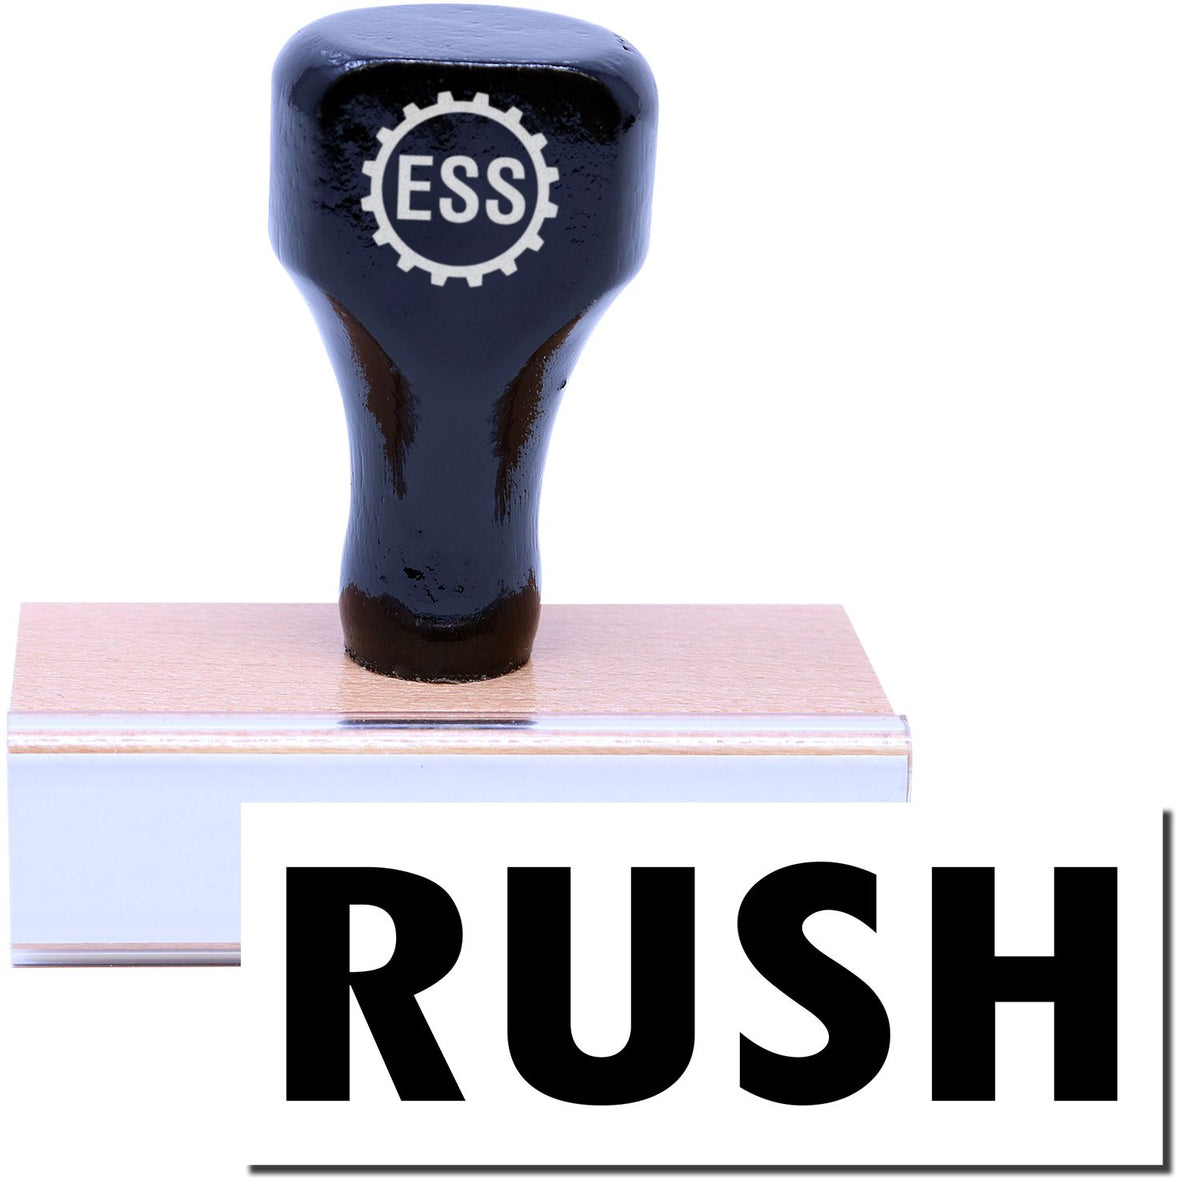 A stock office rubber stamp with a stamped image showing how the text &quot;RUSH&quot; in a large font is displayed after stamping.